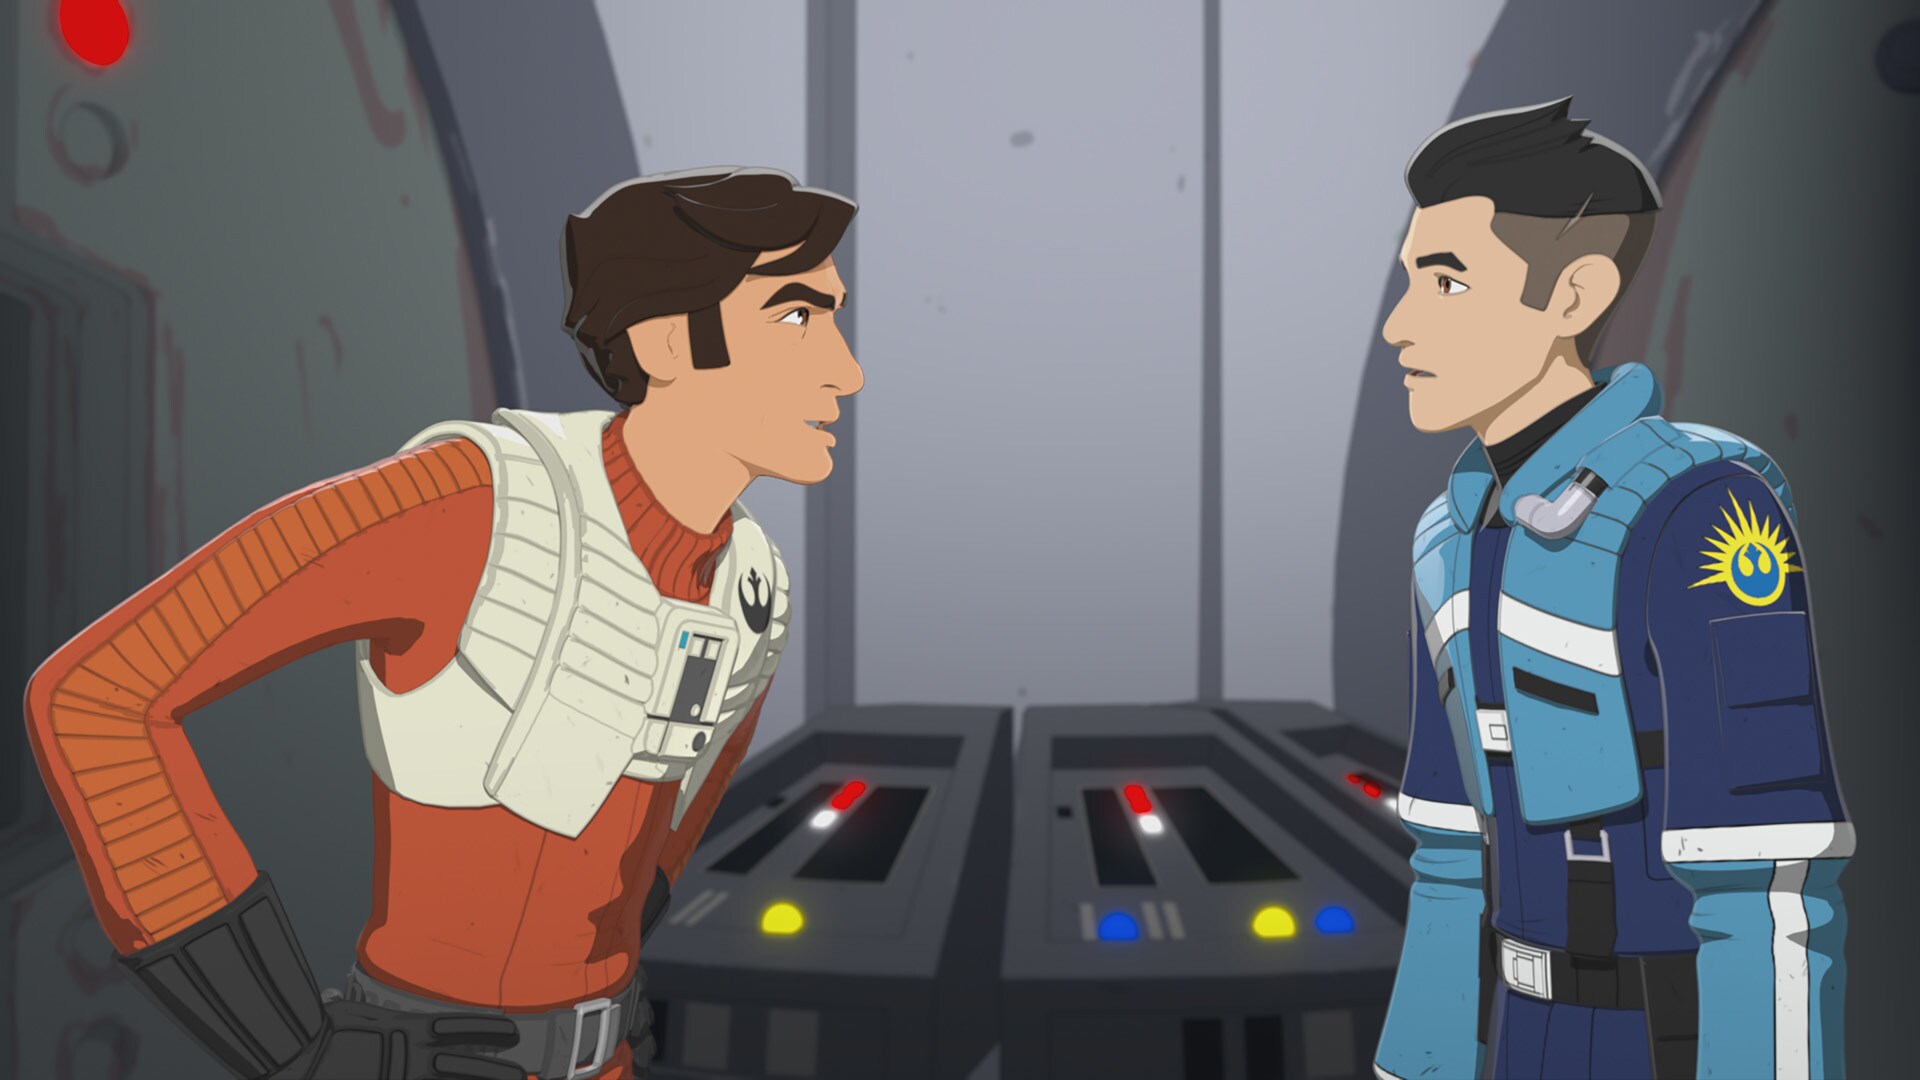 Aboard a Resistance blockade runner, Poe encourages Kaz to join him and fight with the Resistance.